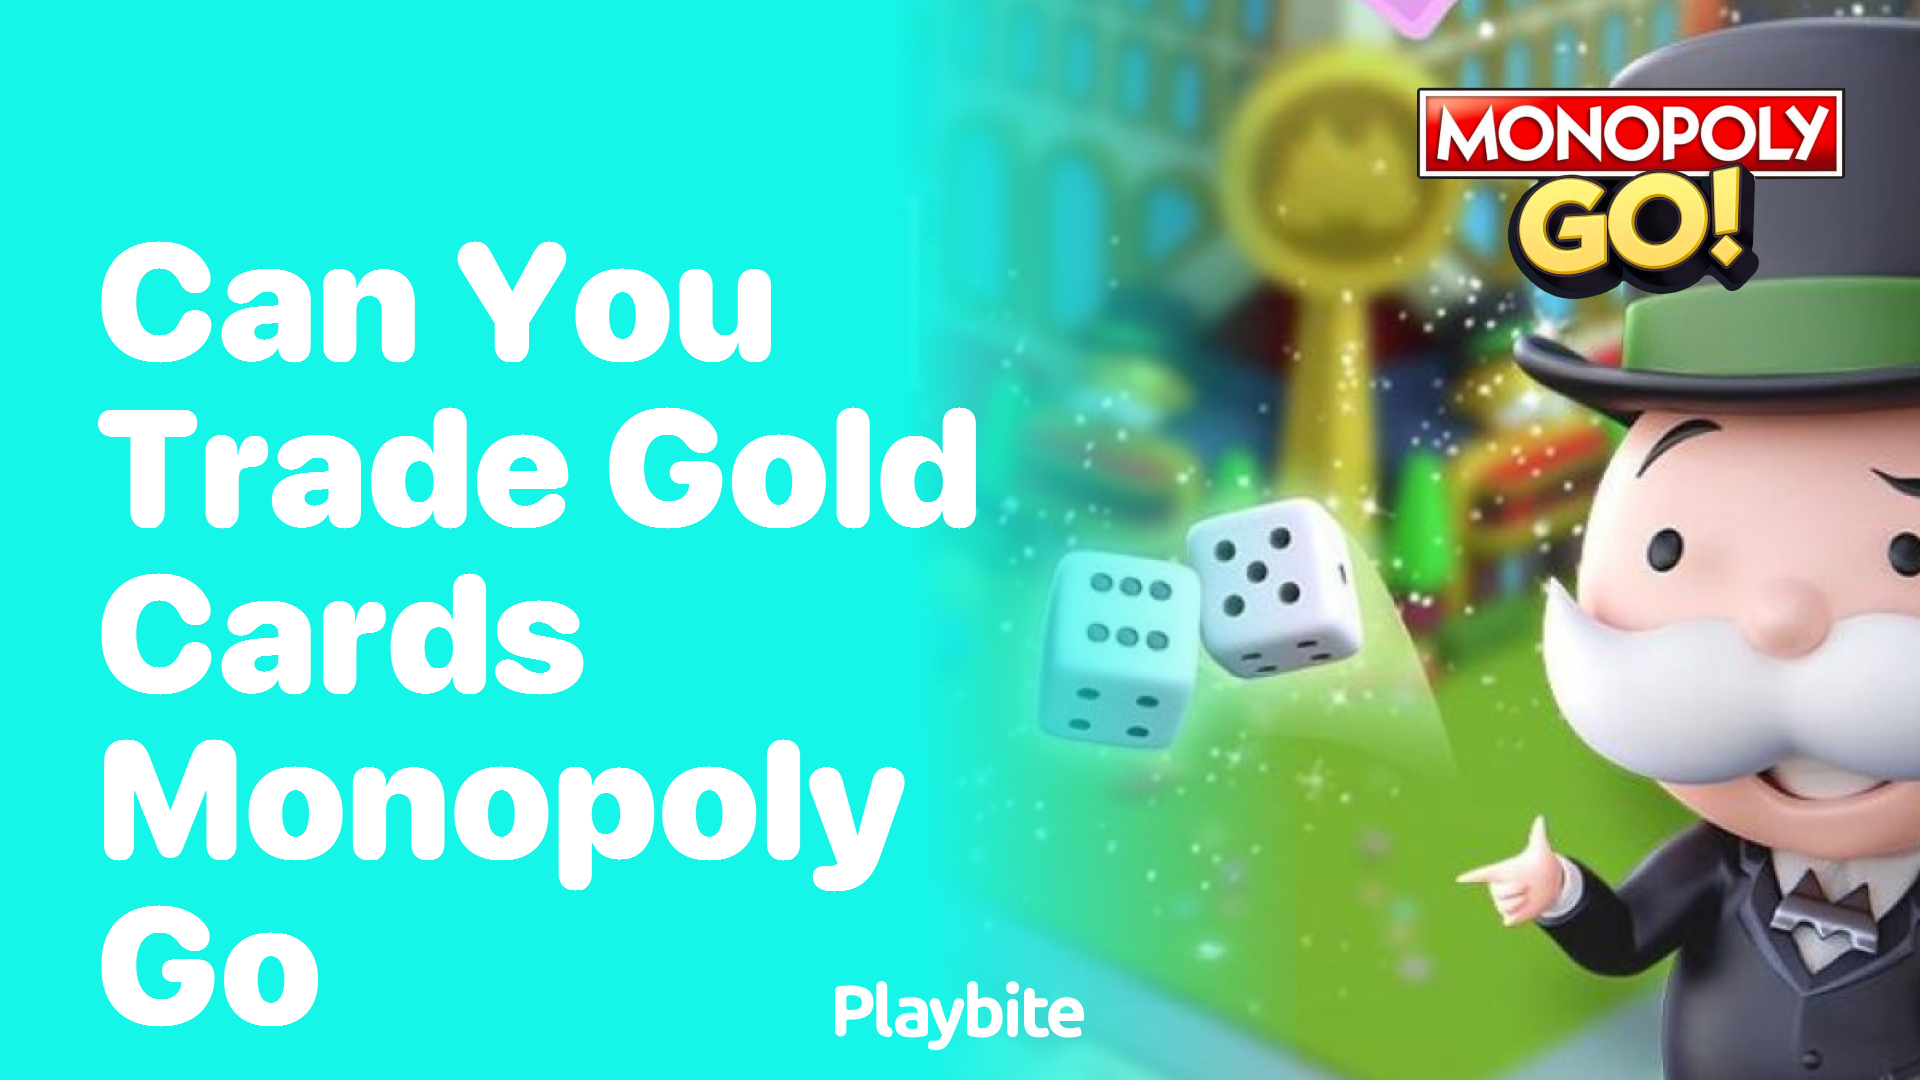 Can You Trade Gold Cards in Monopoly Go?